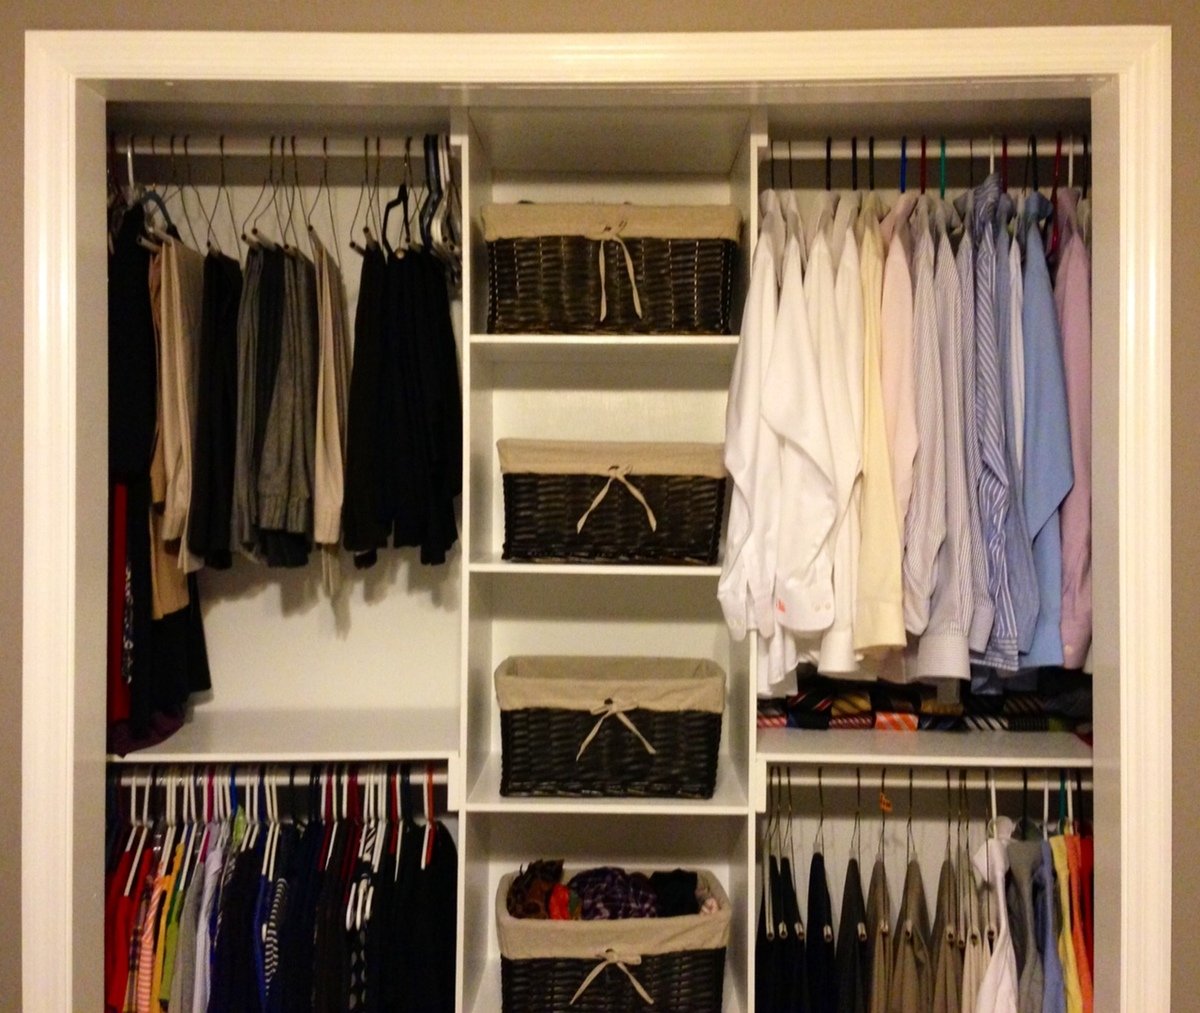 Simple Closet Organizer | Do It Yourself Home Projects from Ana White